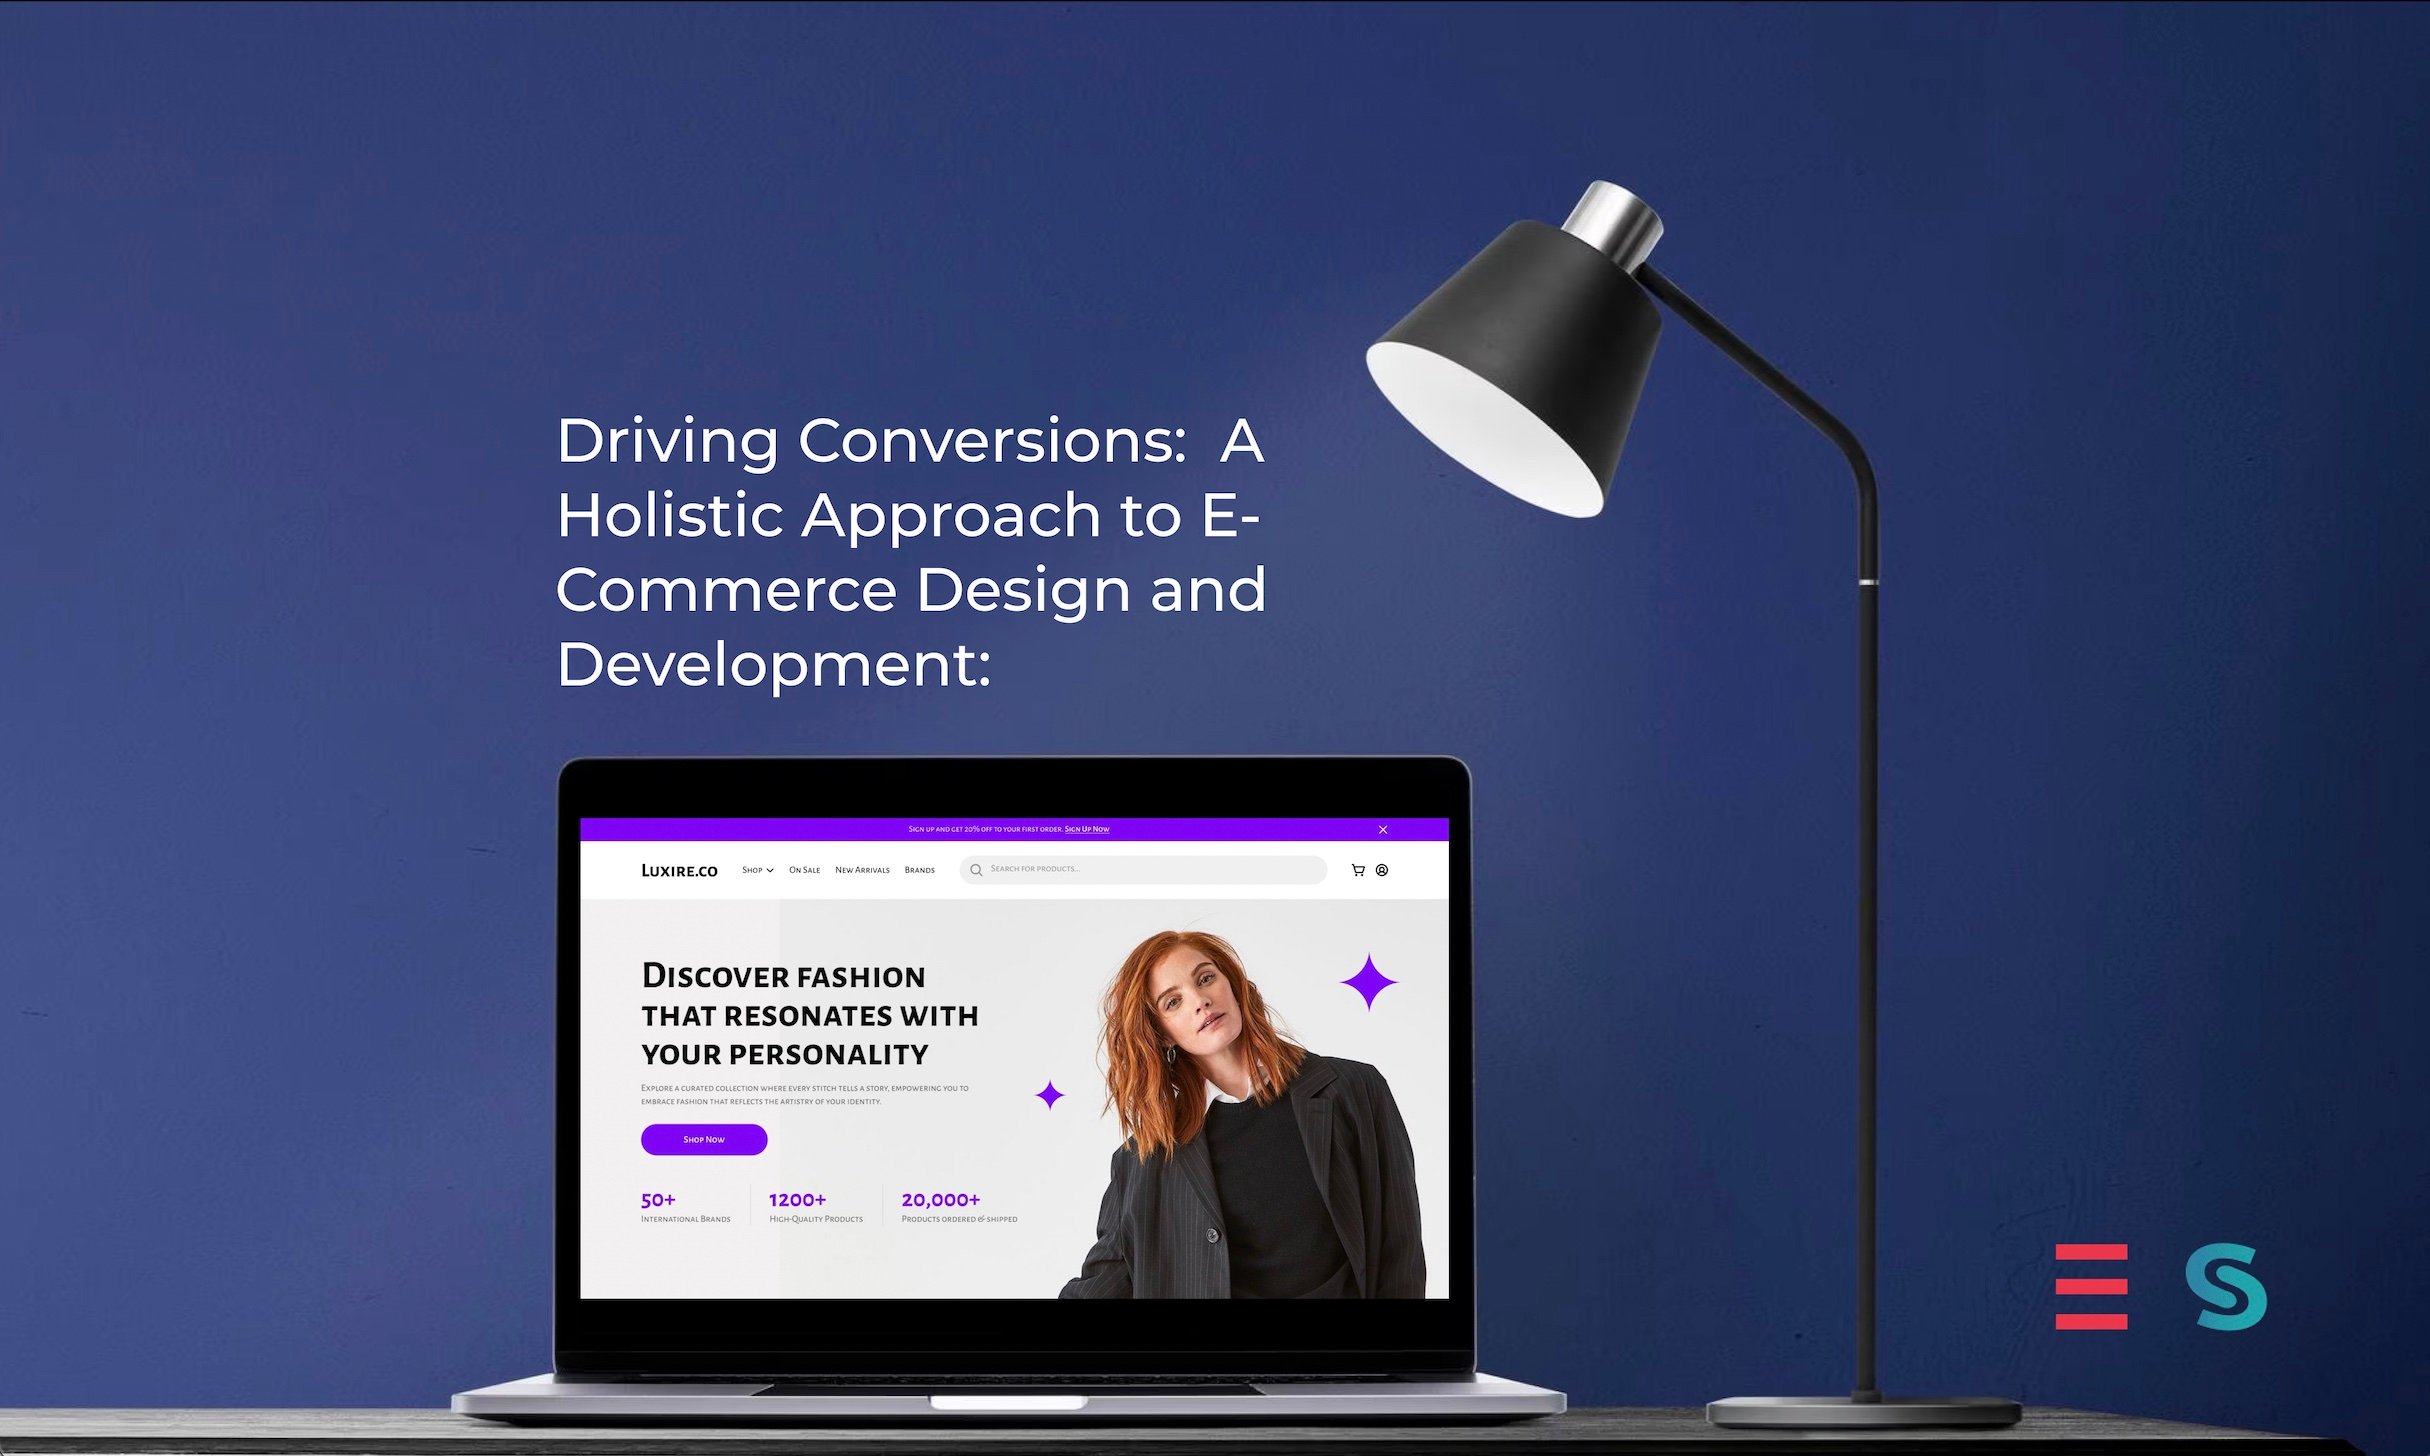 Driving Conversions: A Holistic Approach to E-Commerce Design and Development